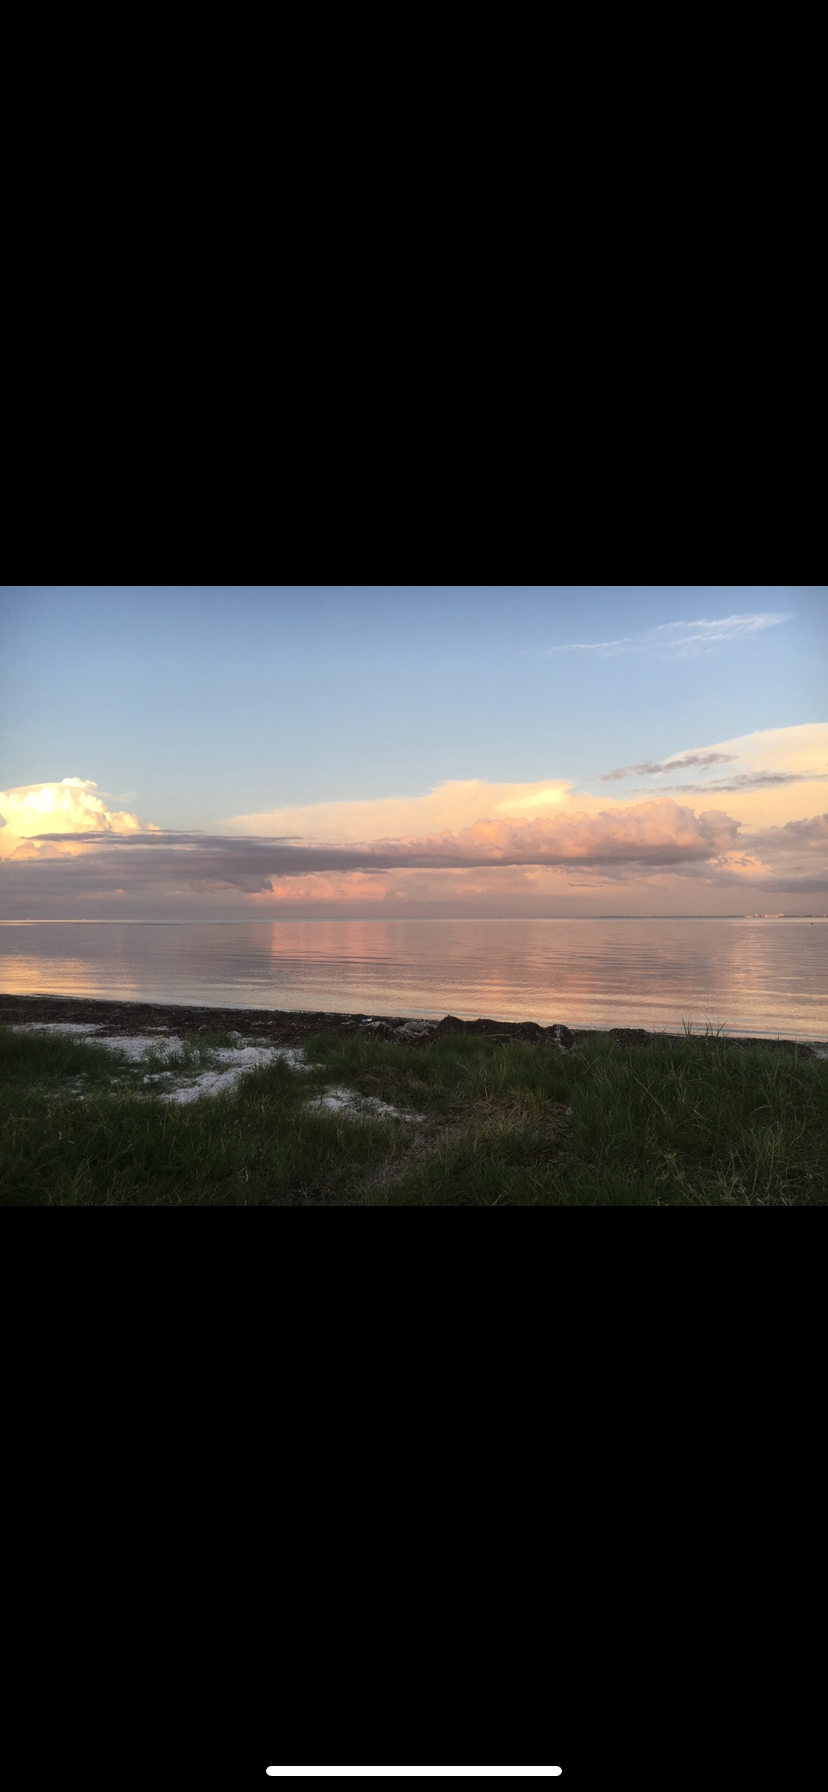 Camper submitted image from Skyway Beach  - PERMANENTLY CLOSED FOR CAMPING  - 2